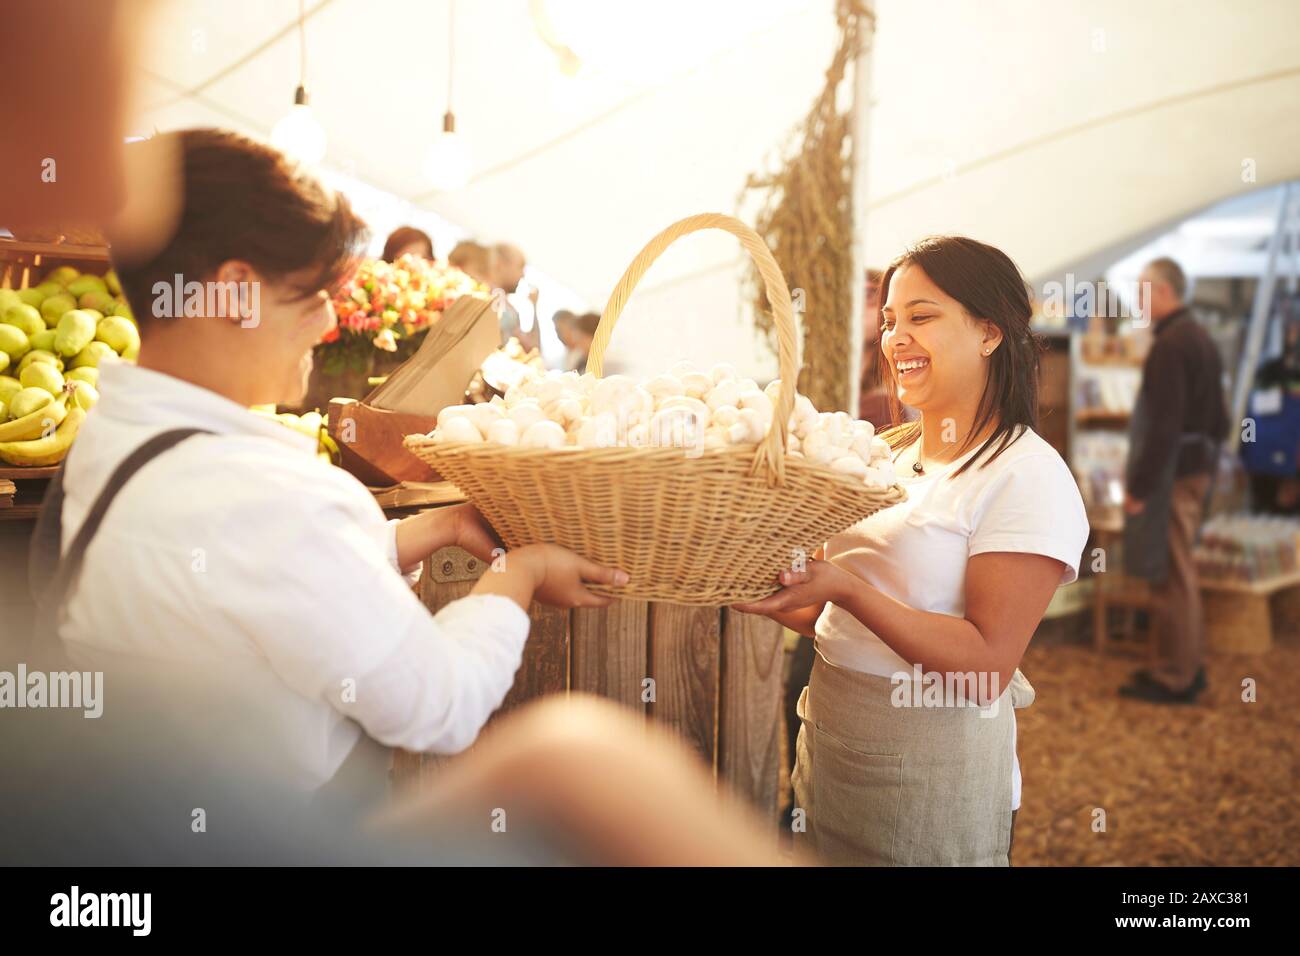 Women workers carrying basket of fresh garlic at farmer’s market Stock Photo